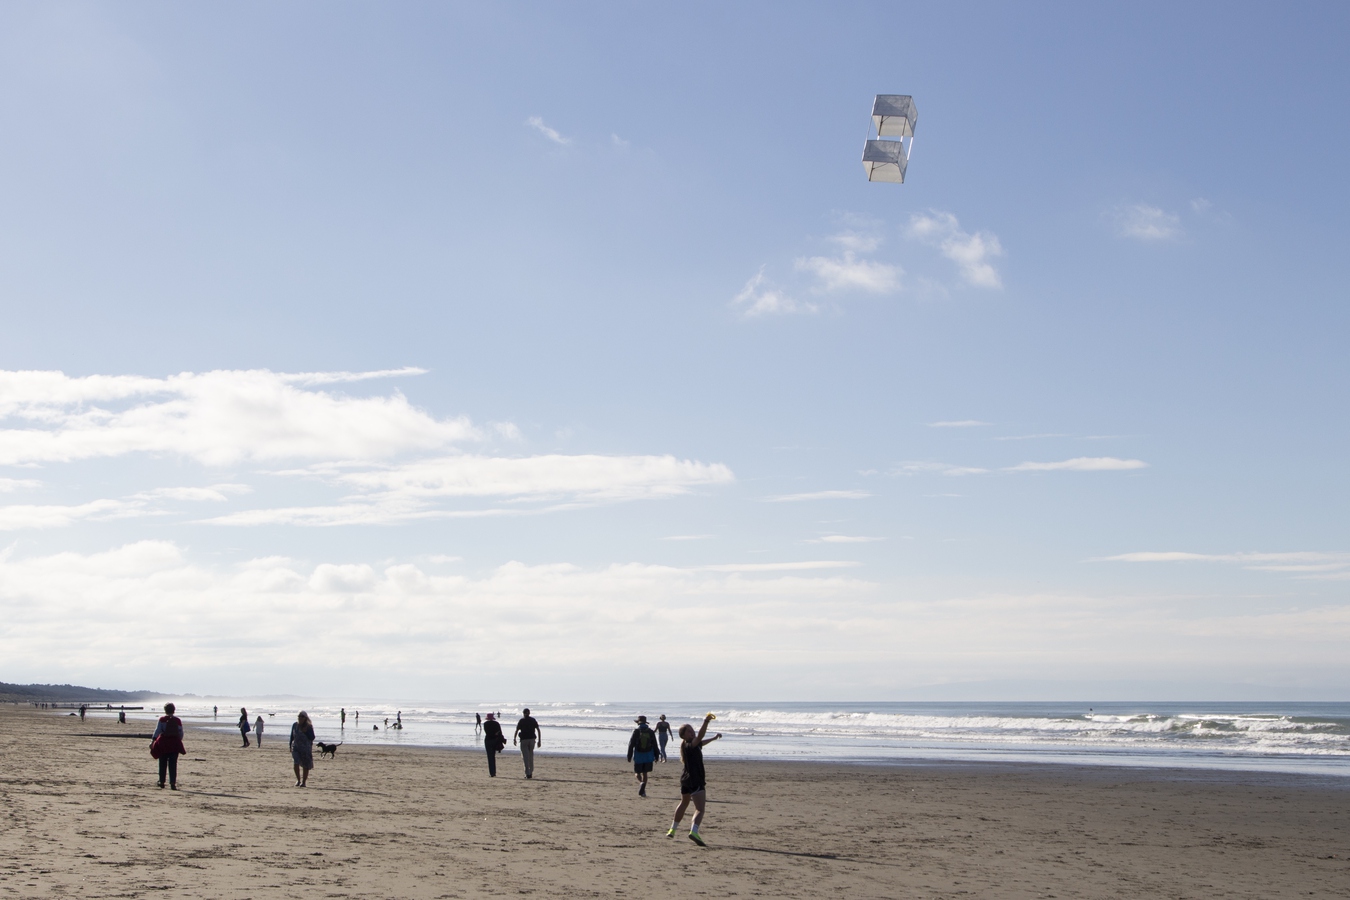 sandy beach with a box kite flying, a small crowd and an adolescent running the kite, blue sky